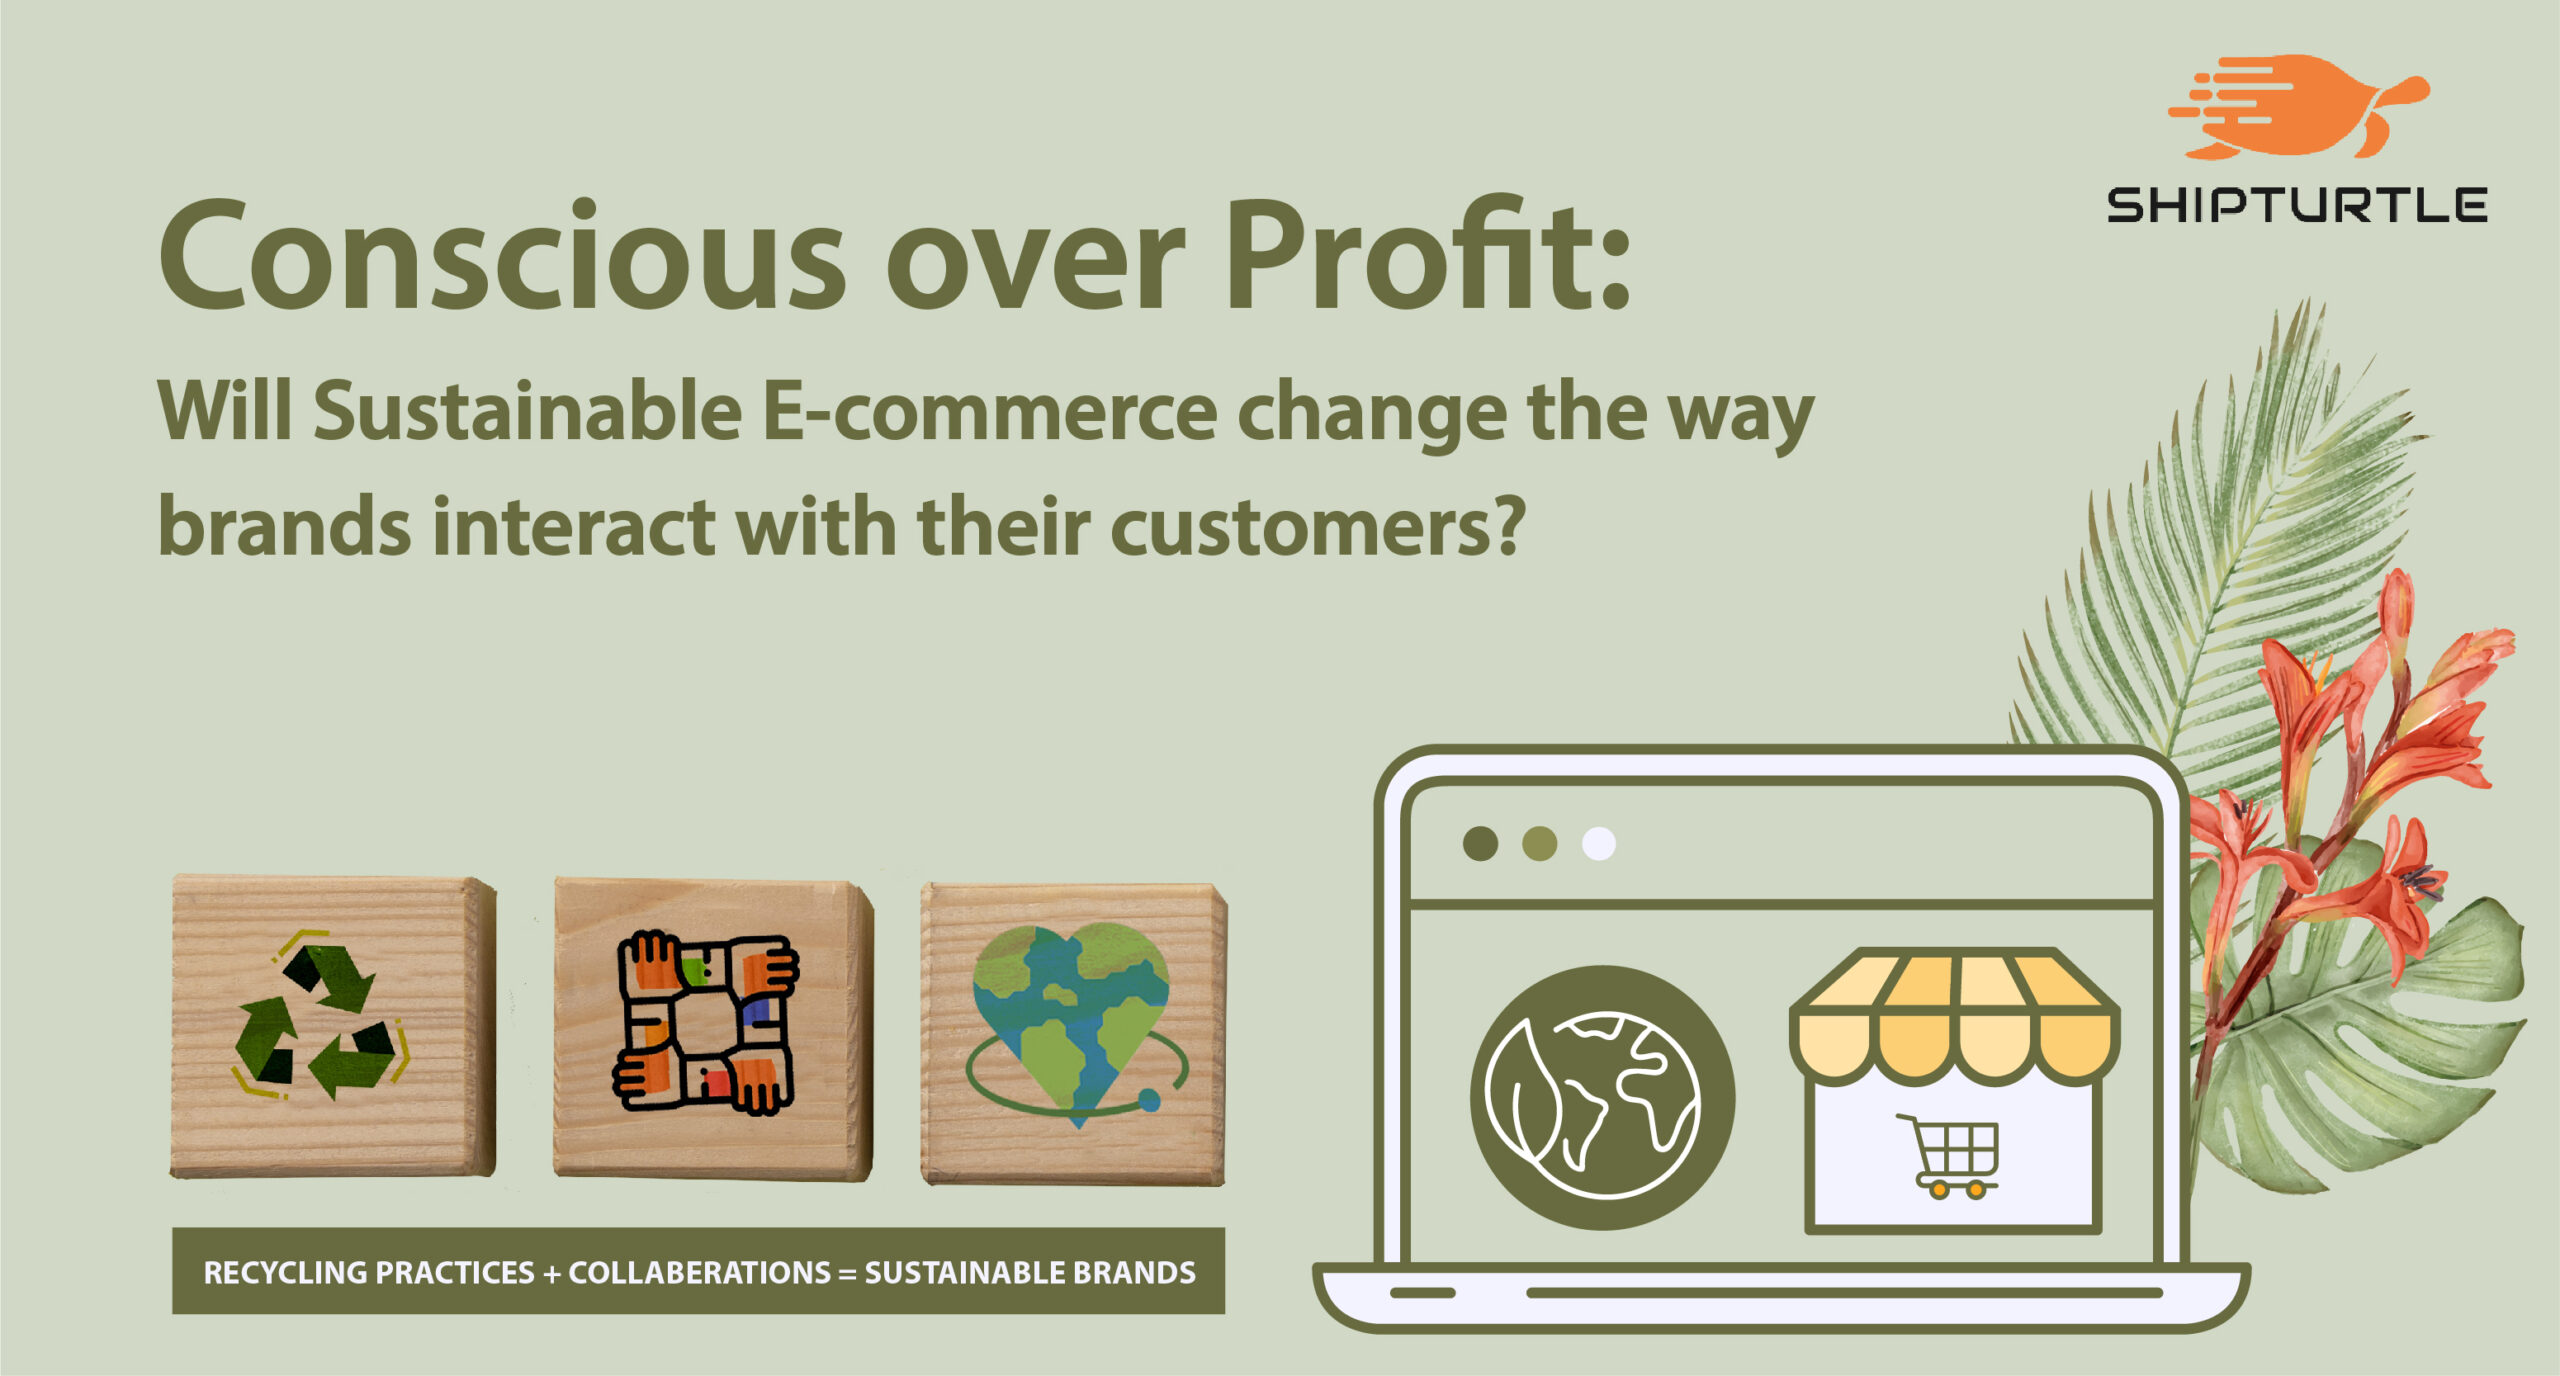 , Conscience over profit: Will sustainable E-commerce change the way brands interact with their customers?